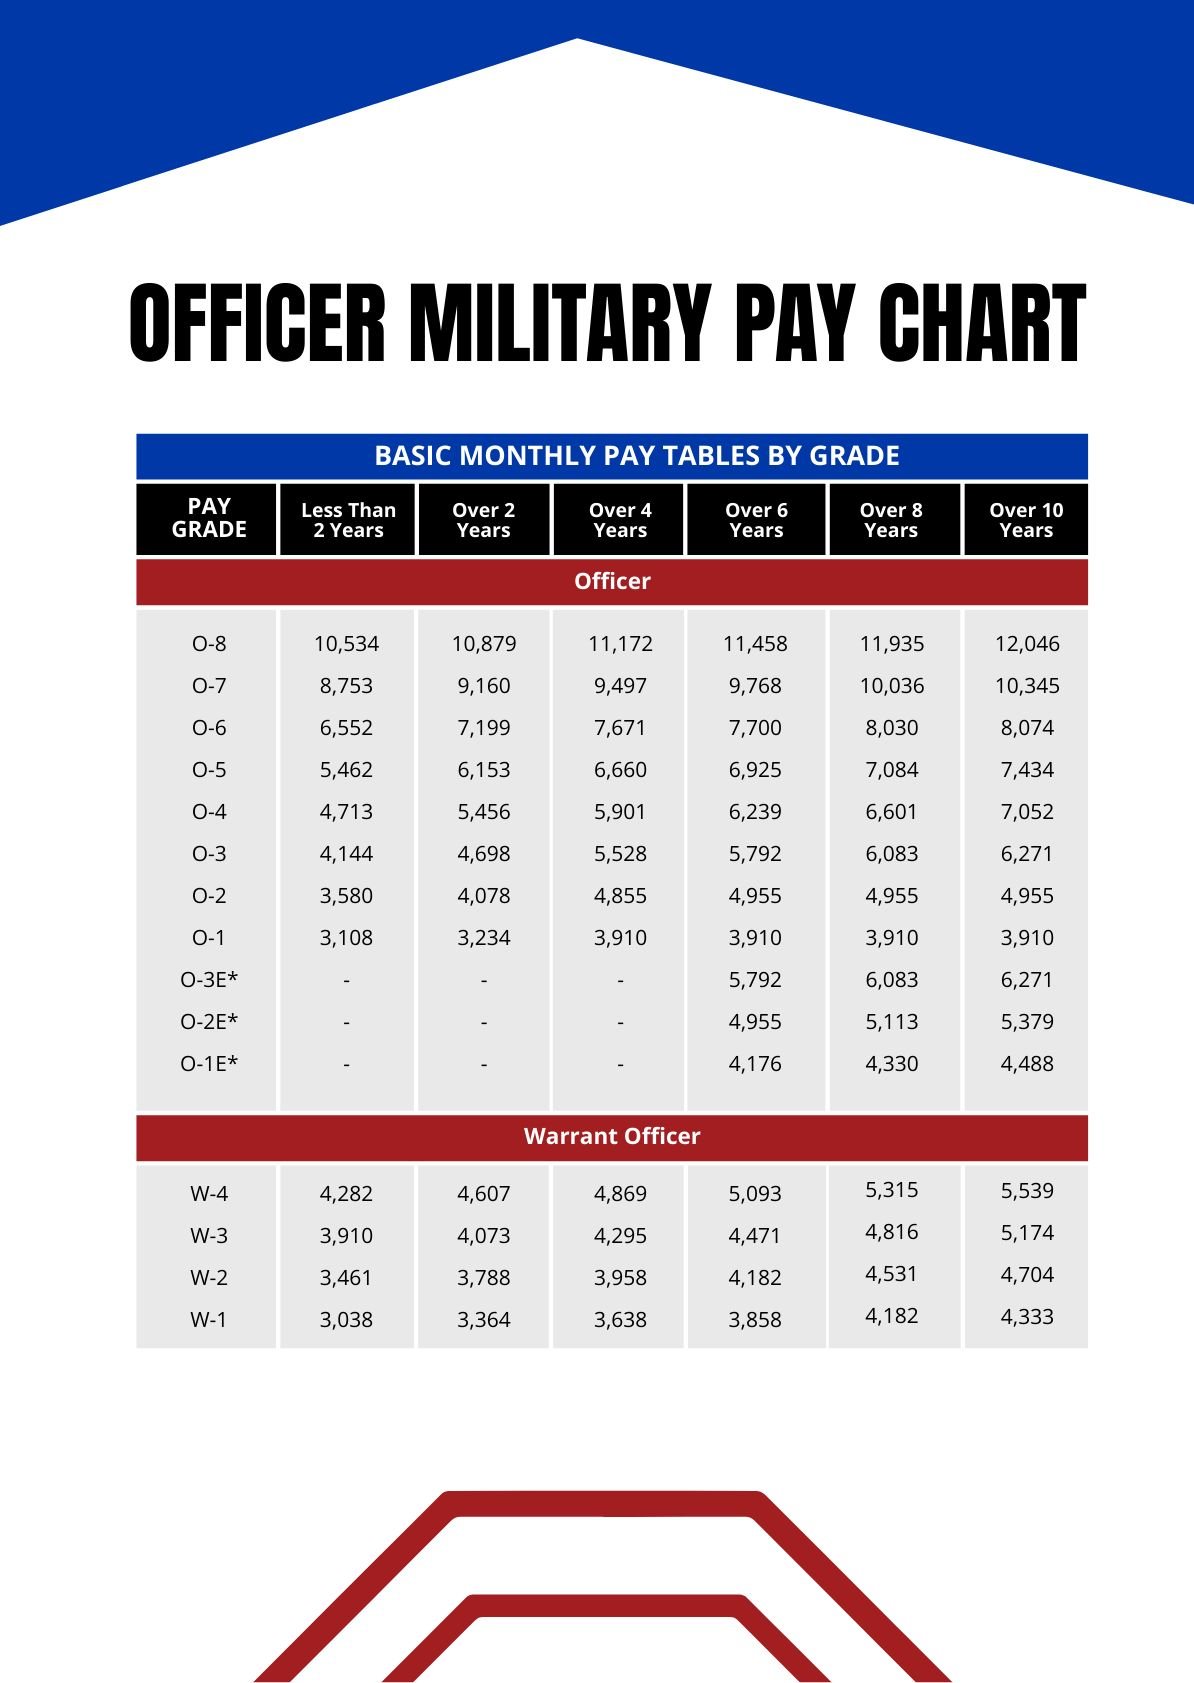 Officer Military Pay Chart in PDF